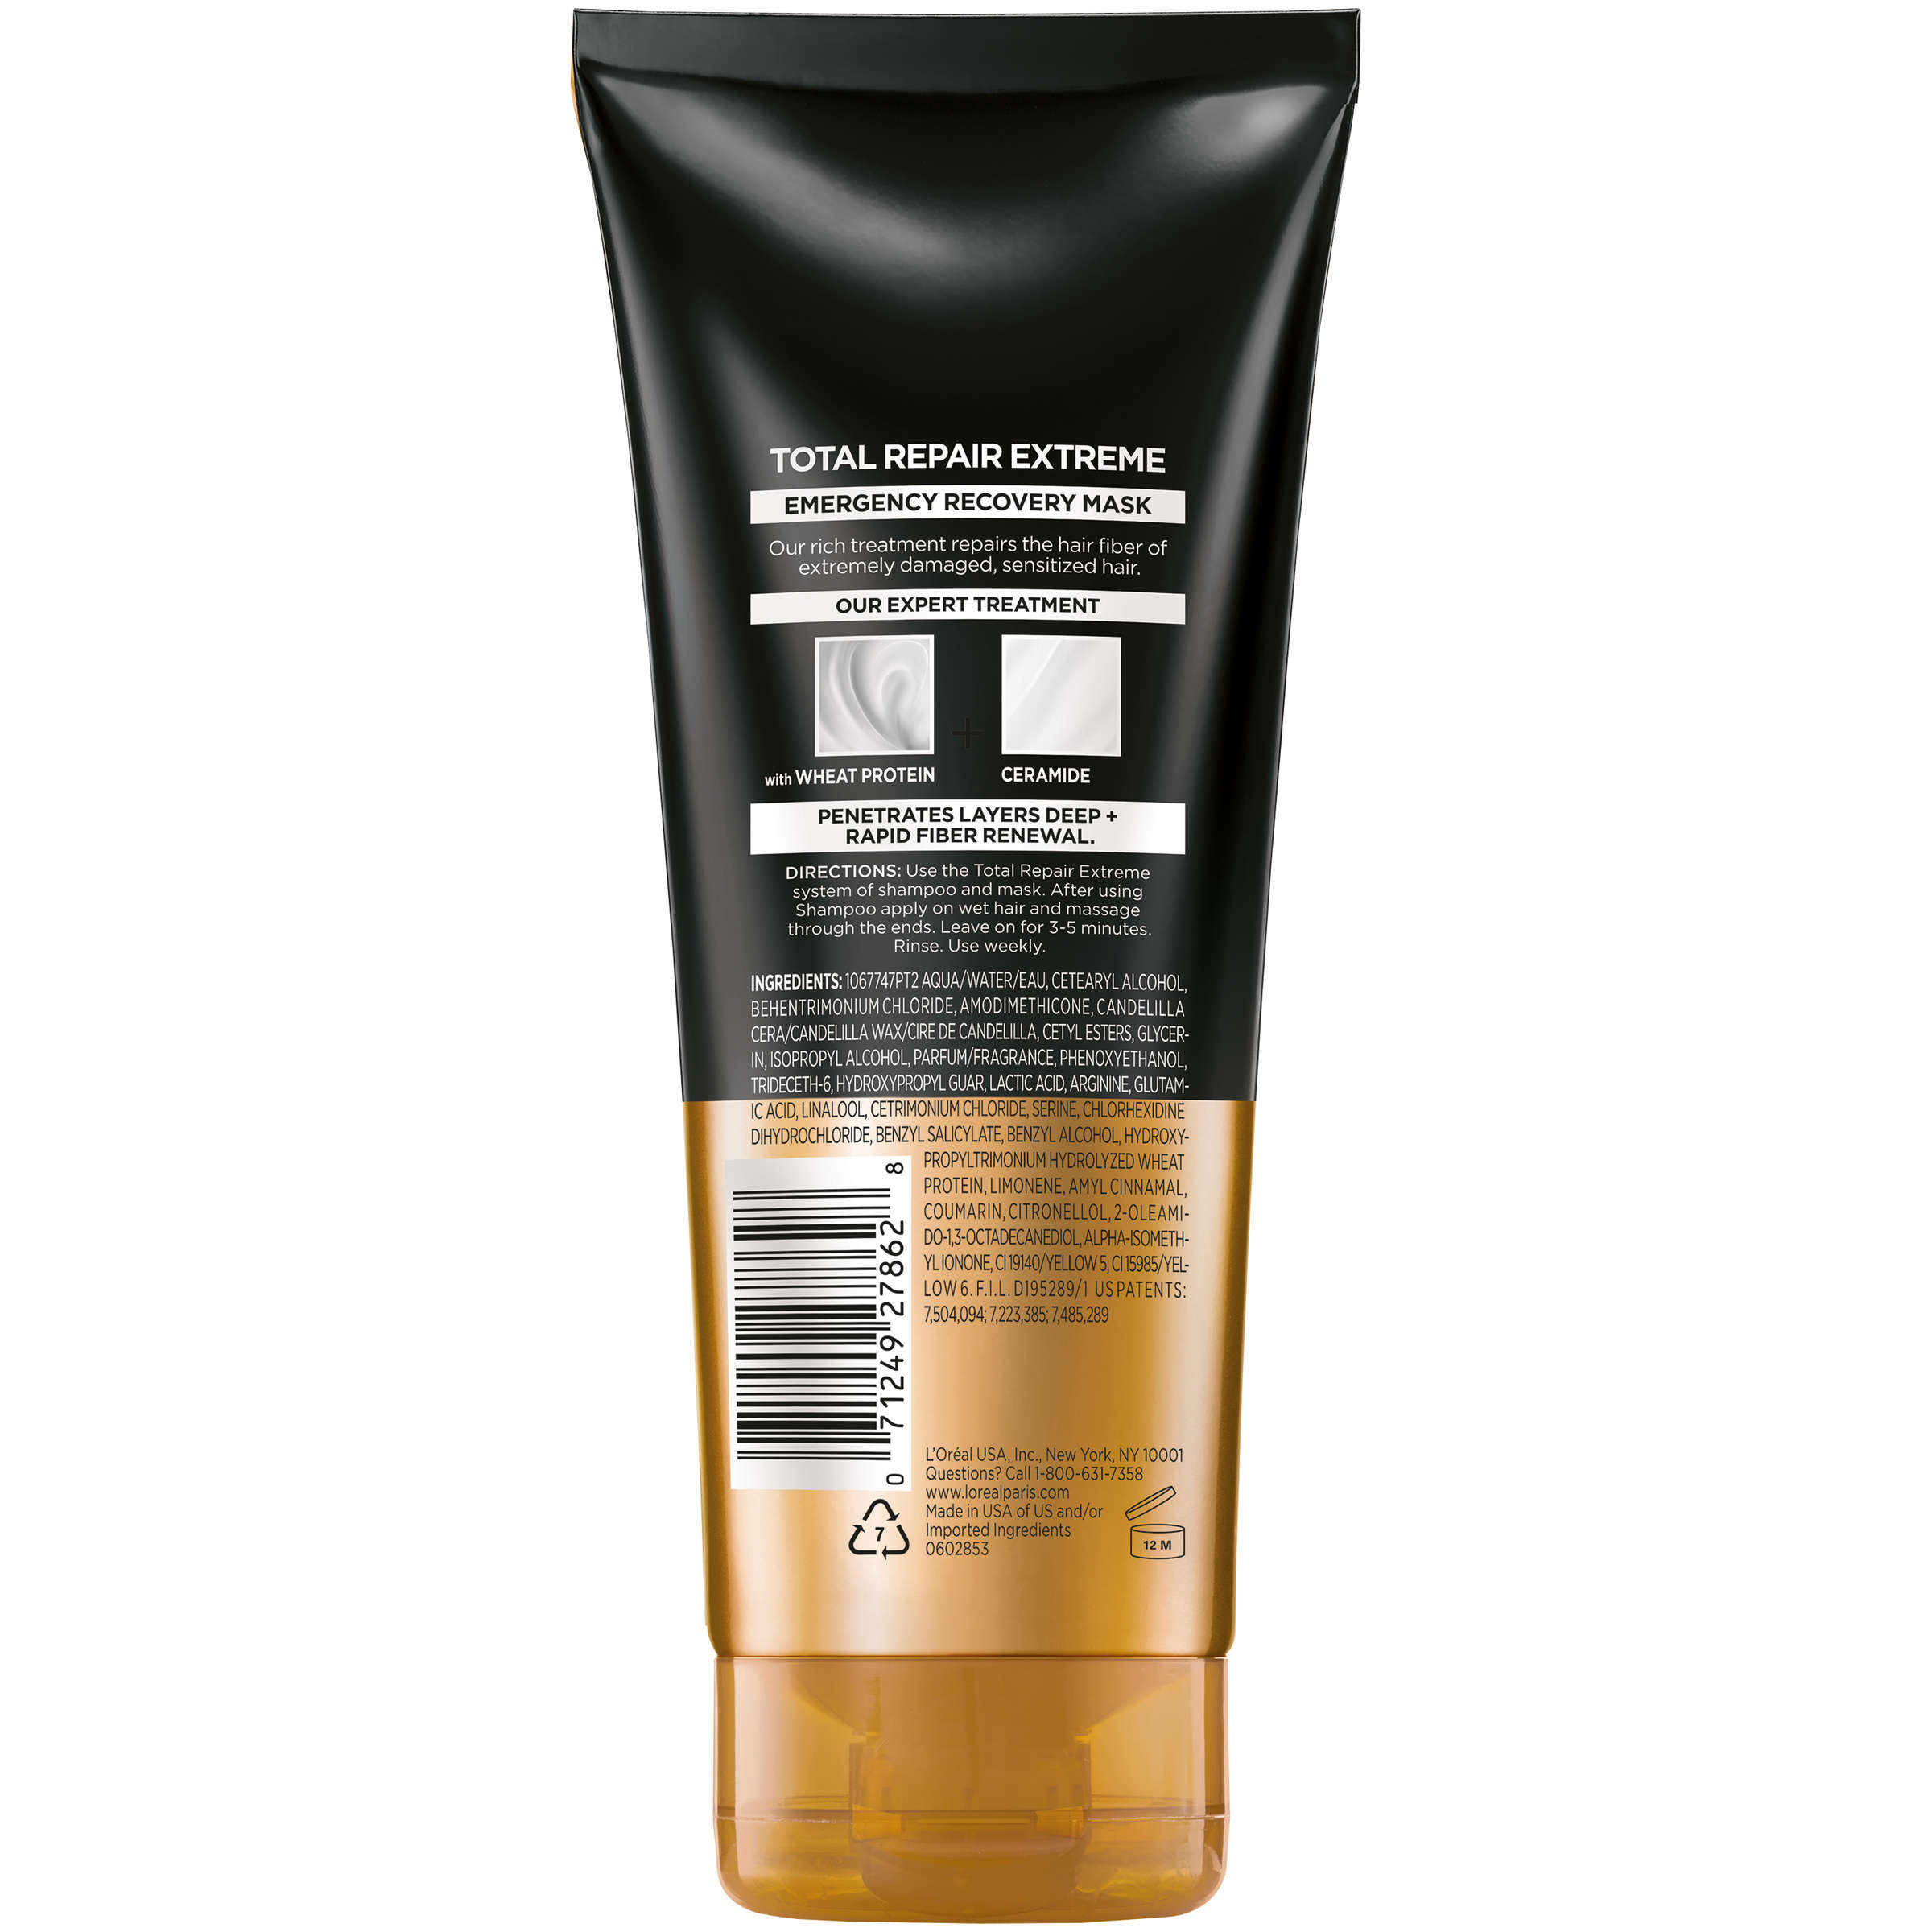 L'Oreal Paris Elvive Total Repair Extreme Emergency Recovery Mask, 6.8 fl. oz. - image 4 of 6